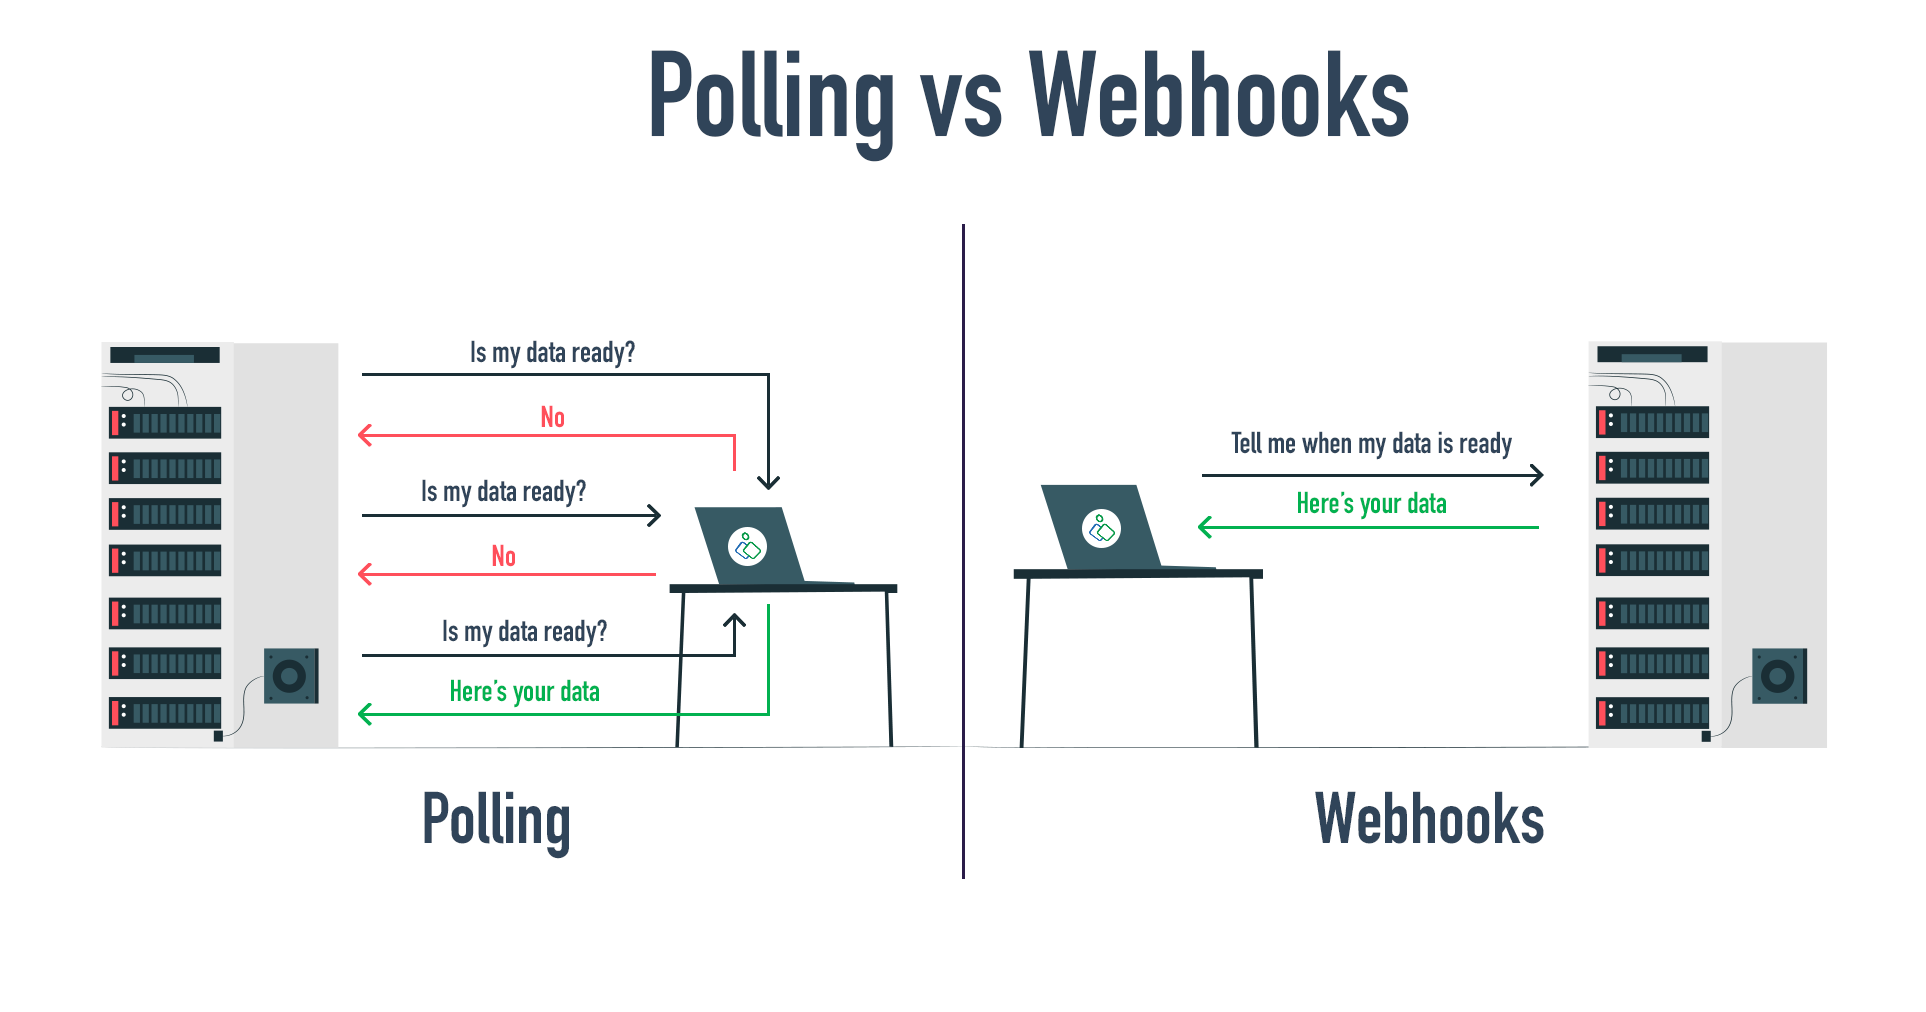 Webhooks allow you to receive data without having to ask for it

